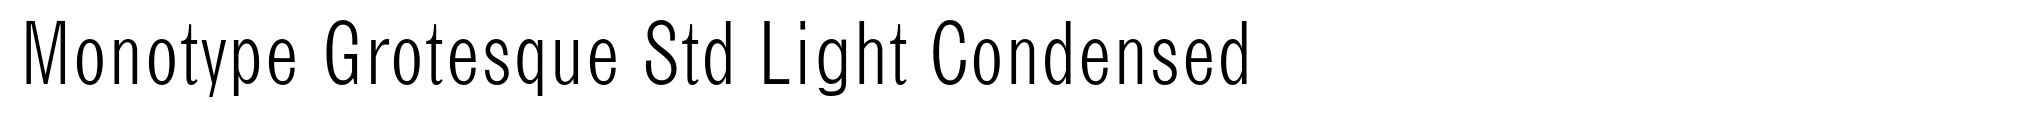 Monotype Grotesque Std Light Condensed image